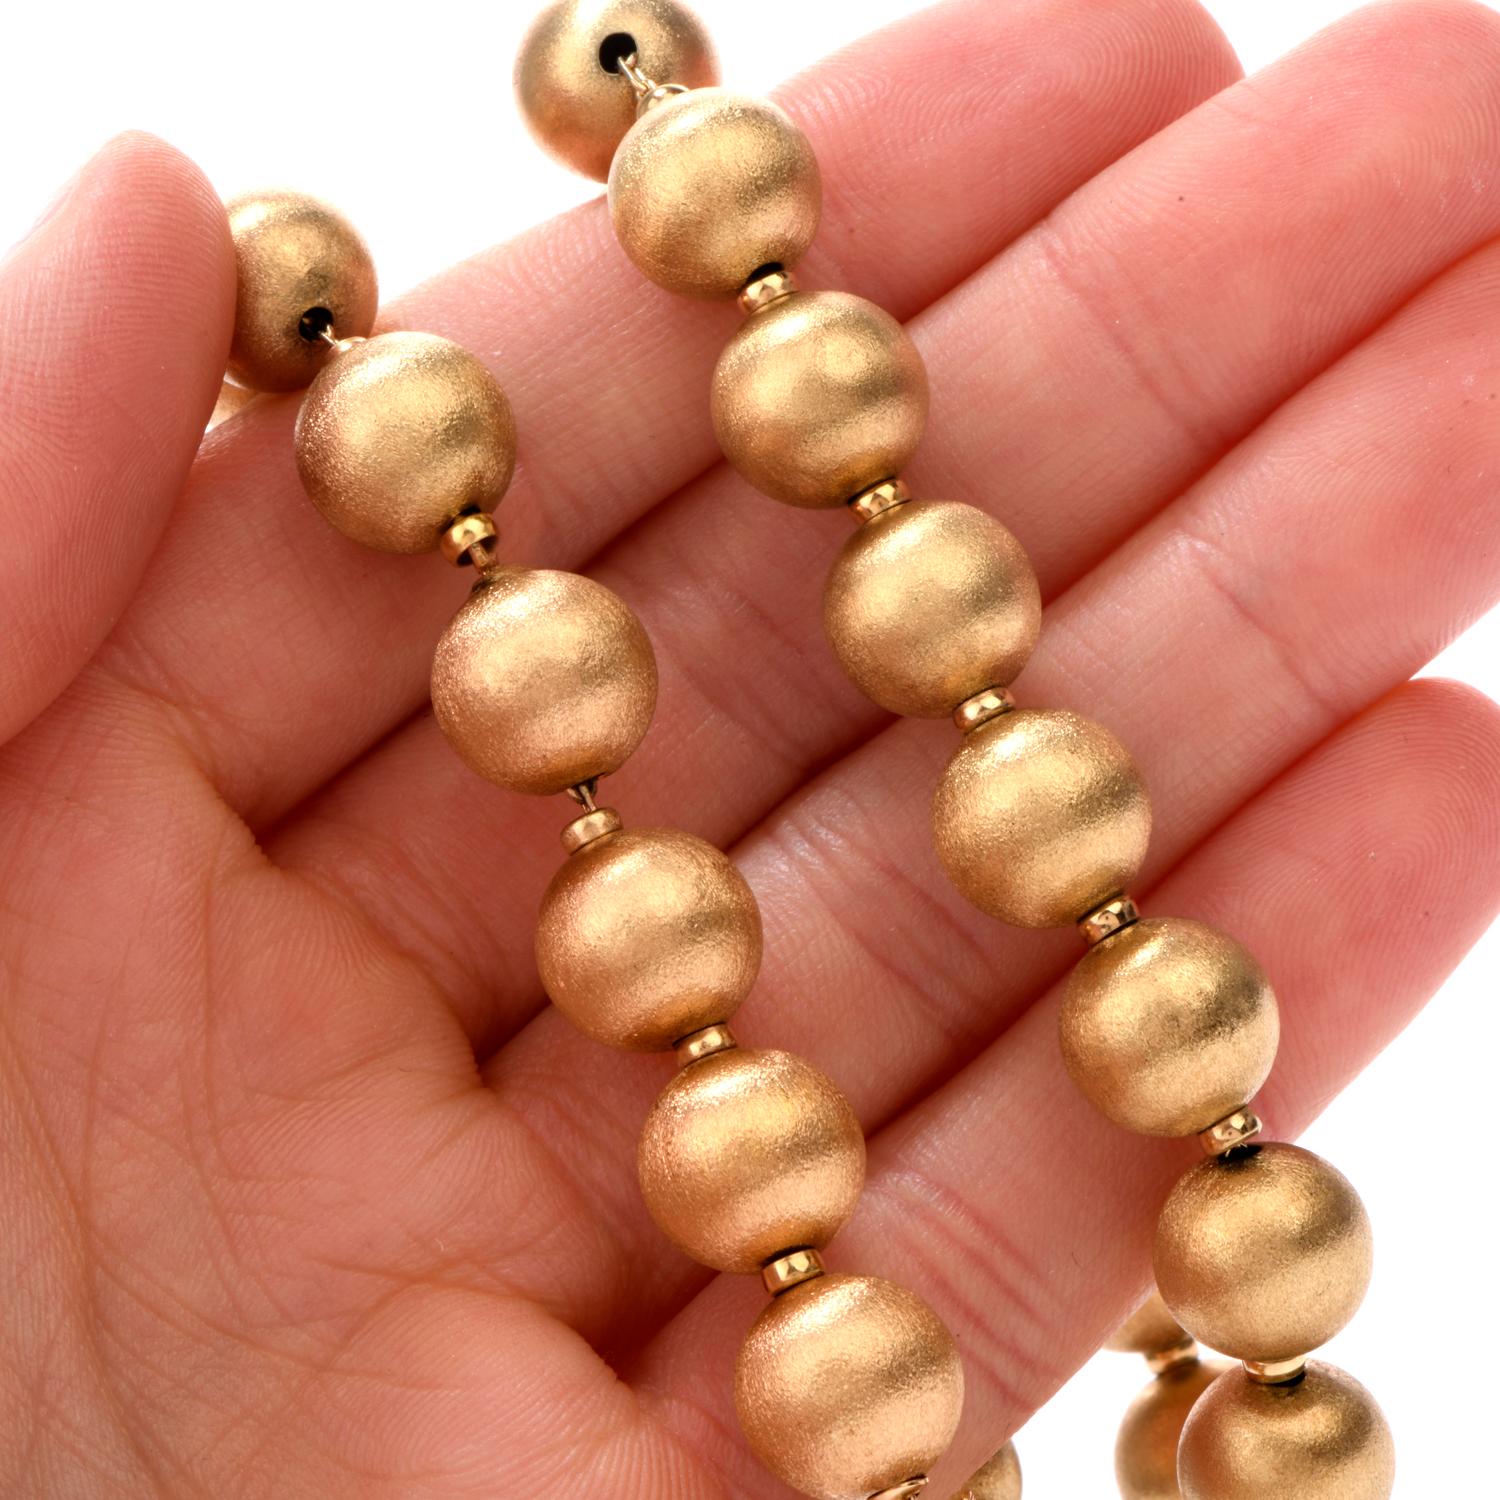 This 17.25 Inch 14 karat gold bead necklace offers a compliment

to any outfit. 36 satin-finished beads, 11mm adorn throughout the cable chain and each is separated by a high polished 1.5mm spacer.

Weighing appx. 40.1 grams

this necklace remains